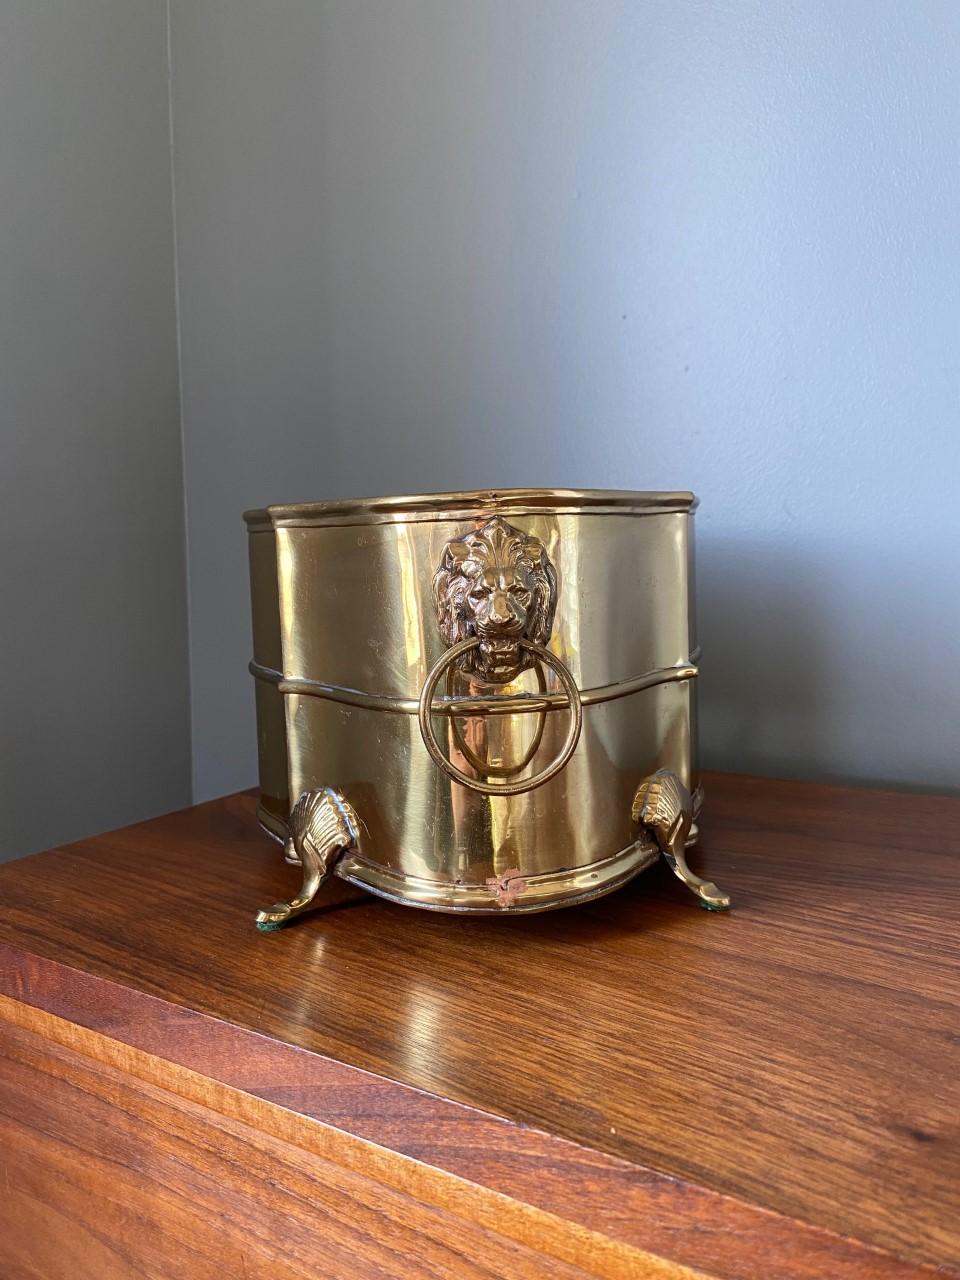 Antique Brass Jardiniere Planter with Lion Head and Feet Details In Good Condition For Sale In San Diego, CA